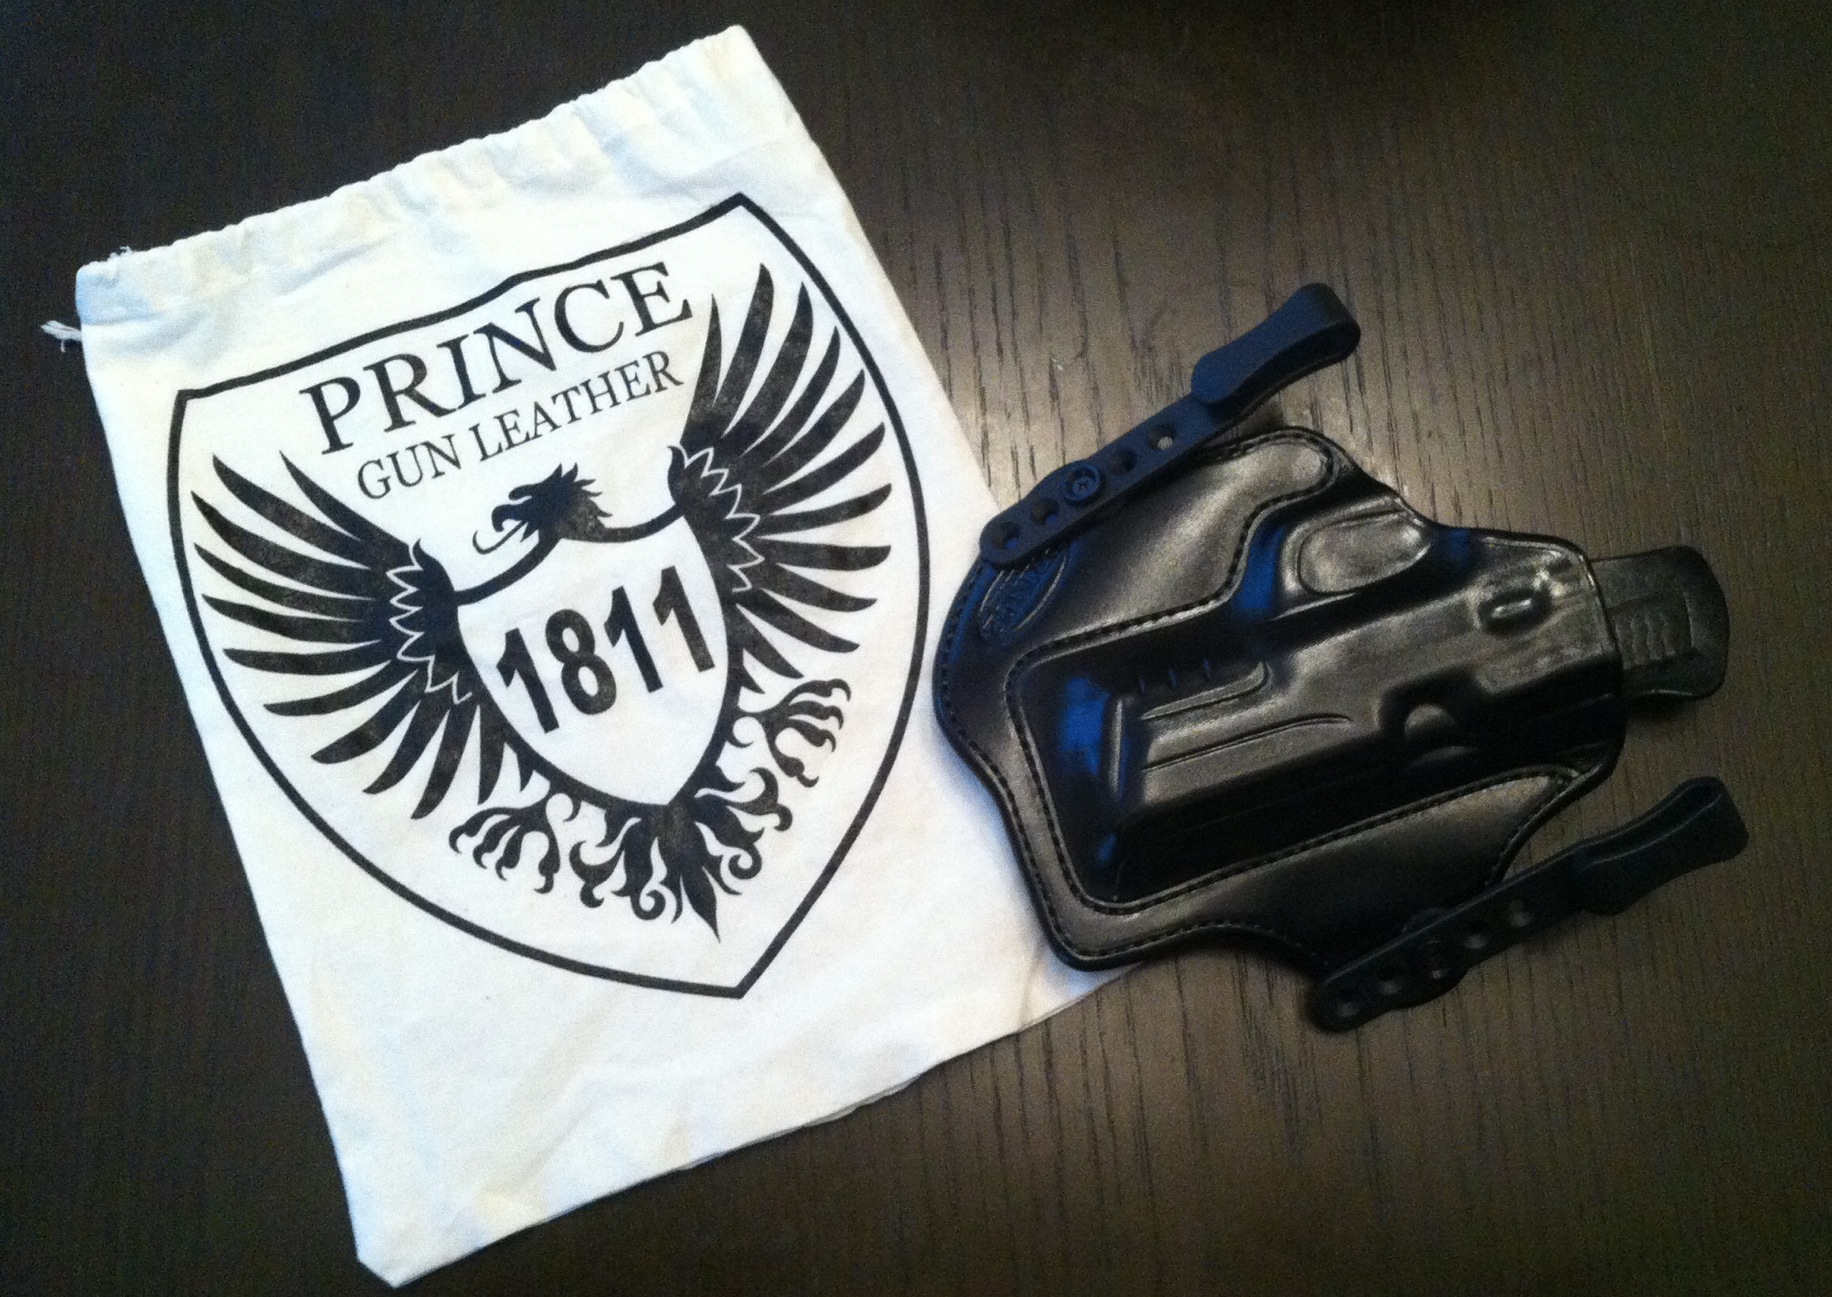 Cotton Muslin Bags That Are Right On Target: Customer Review With Prince Gun Leather